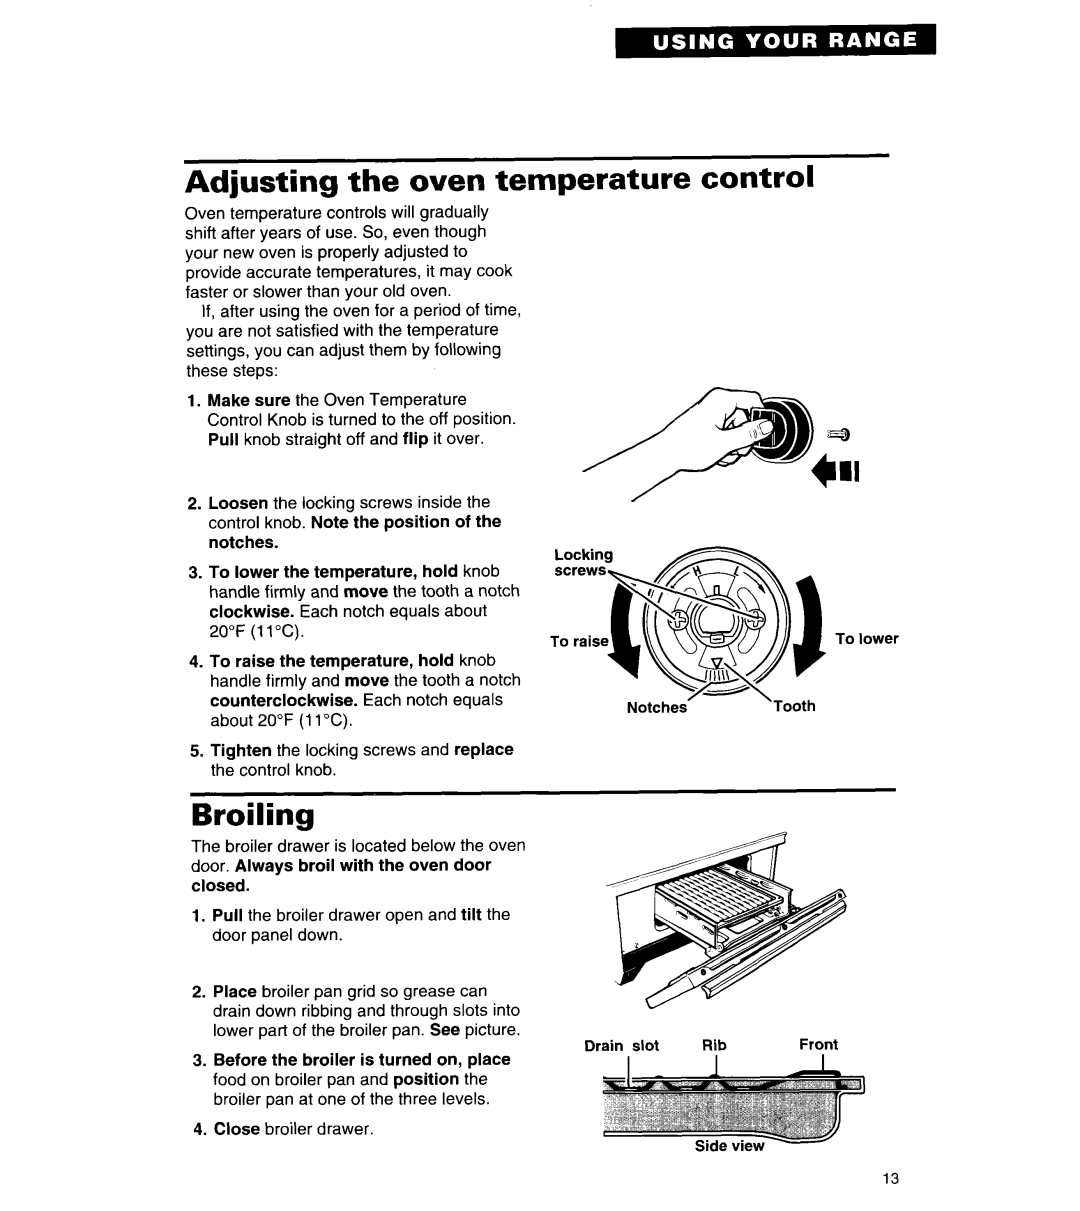 Roper FGP335Y important safety instructions Adjusting the oven temperature, Broiling, control 